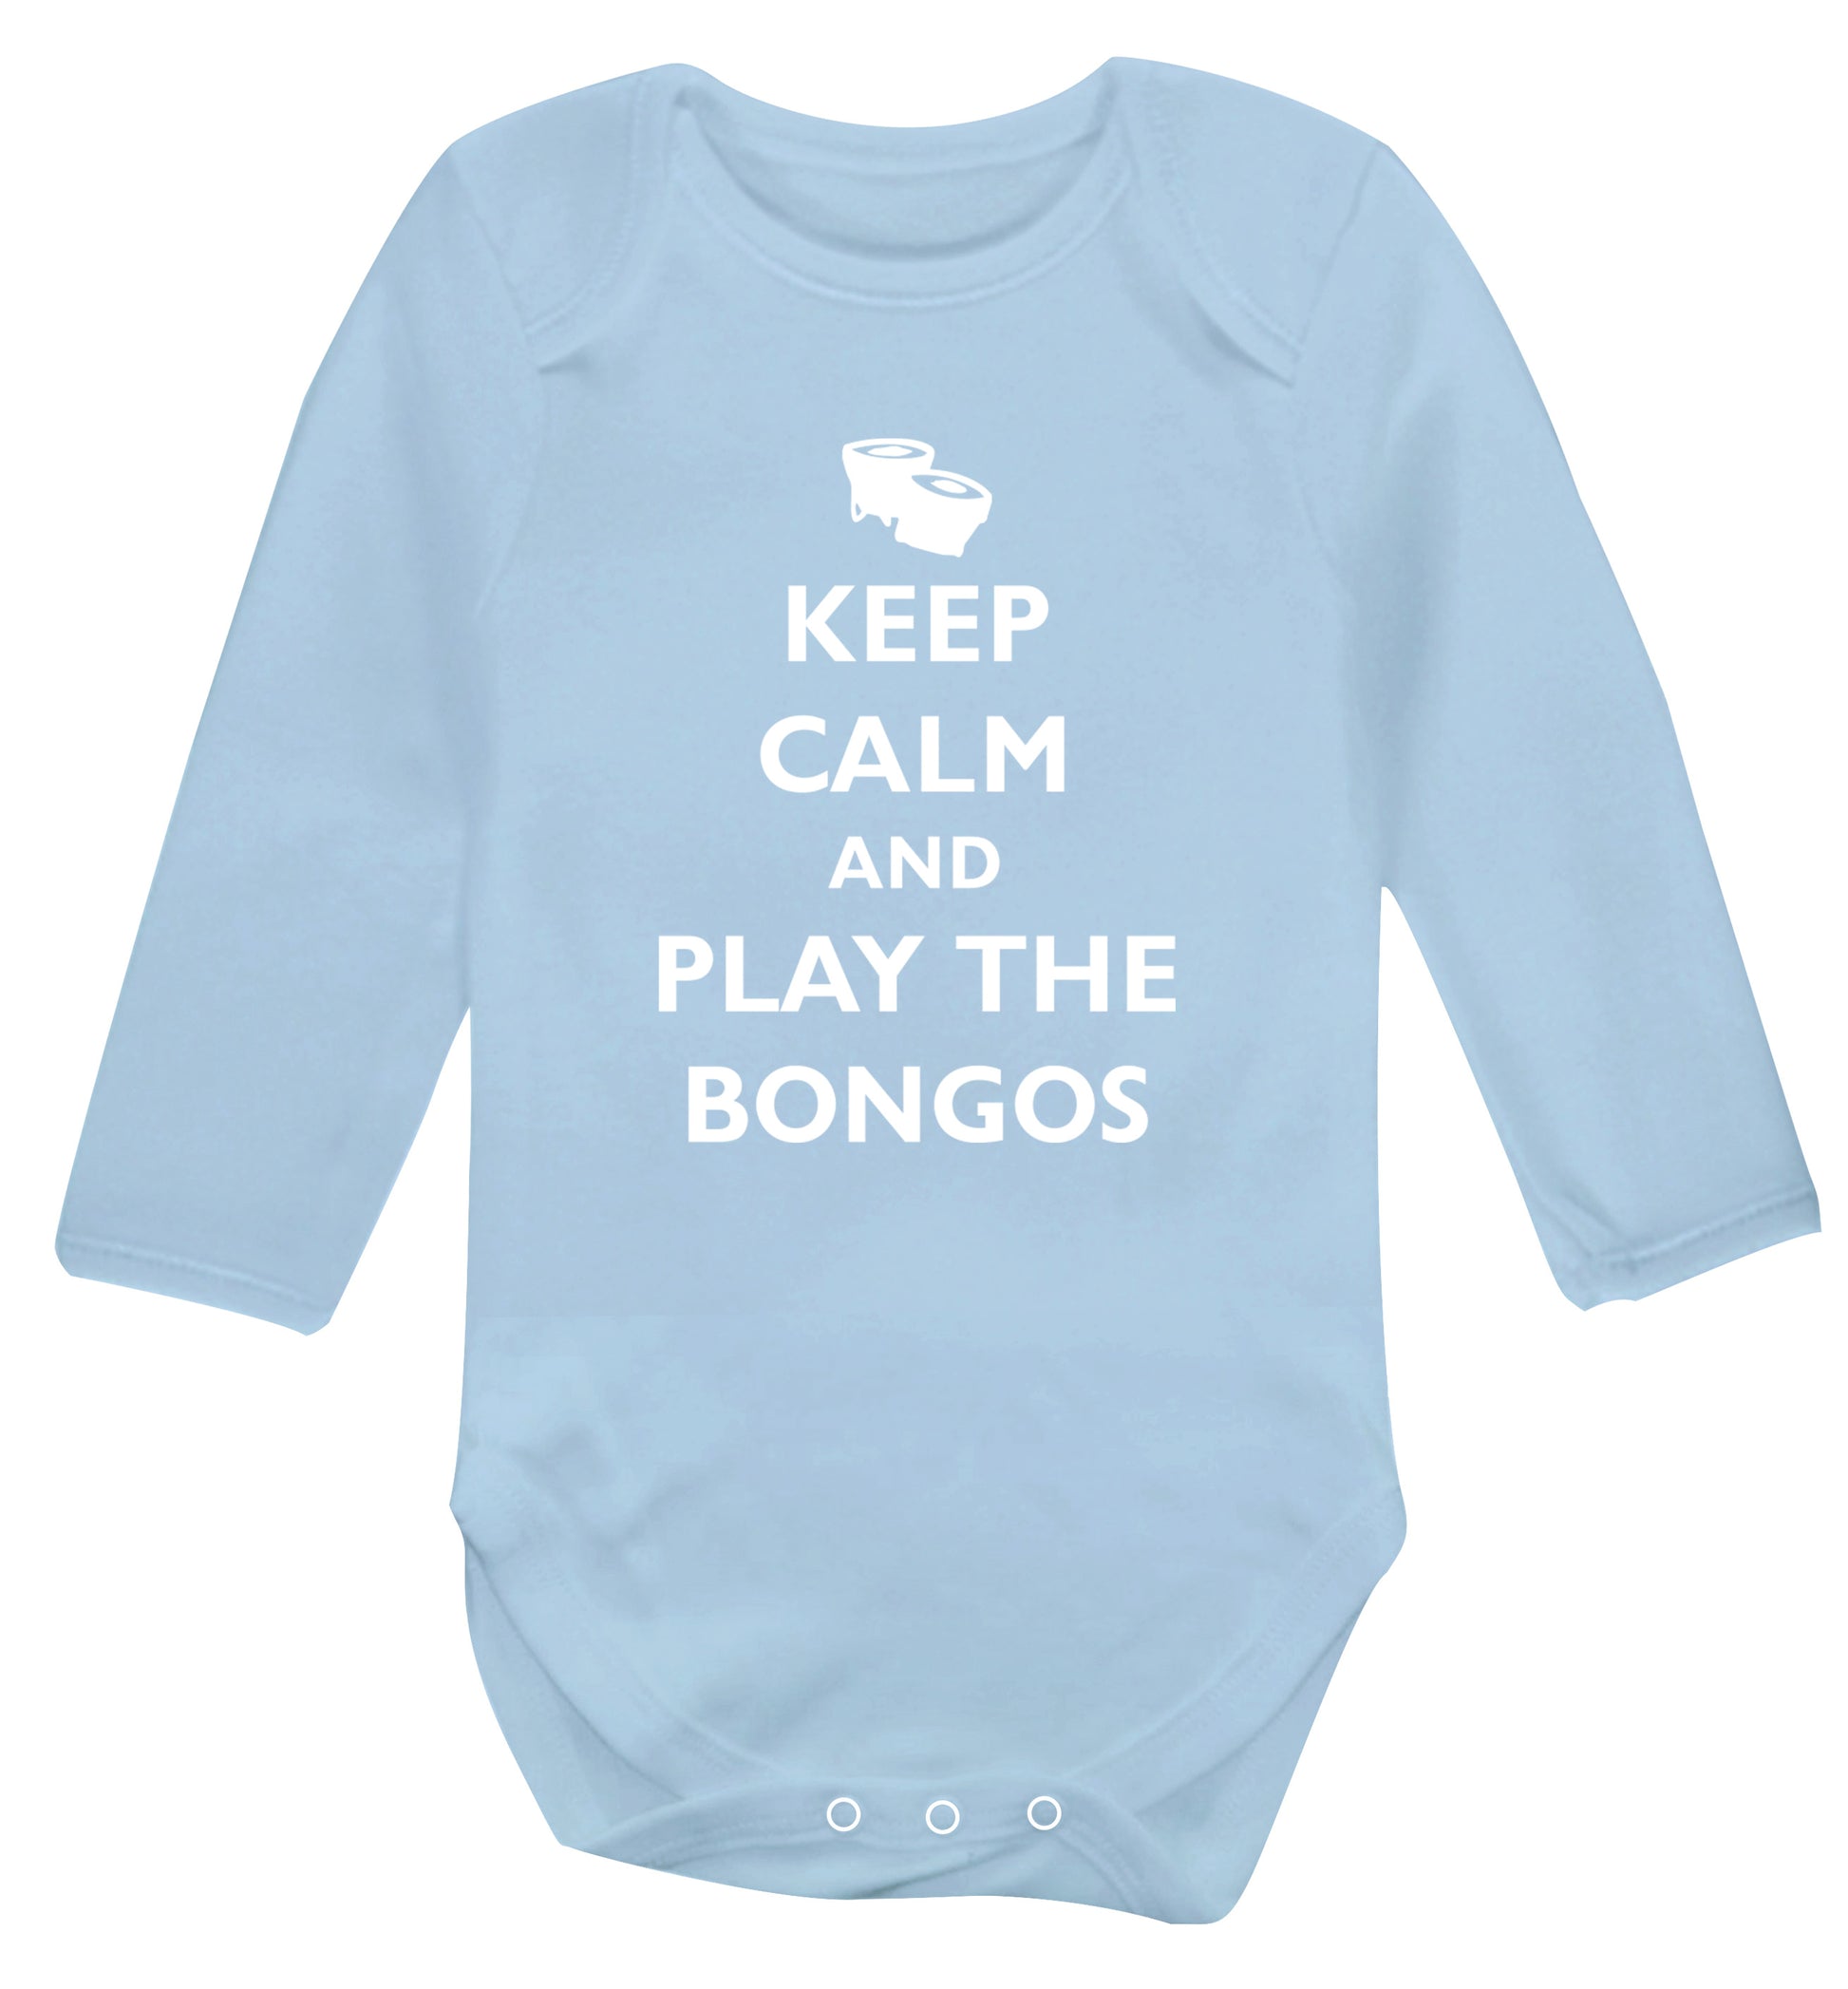 Keep calm and play the bongos Baby Vest long sleeved pale blue 6-12 months